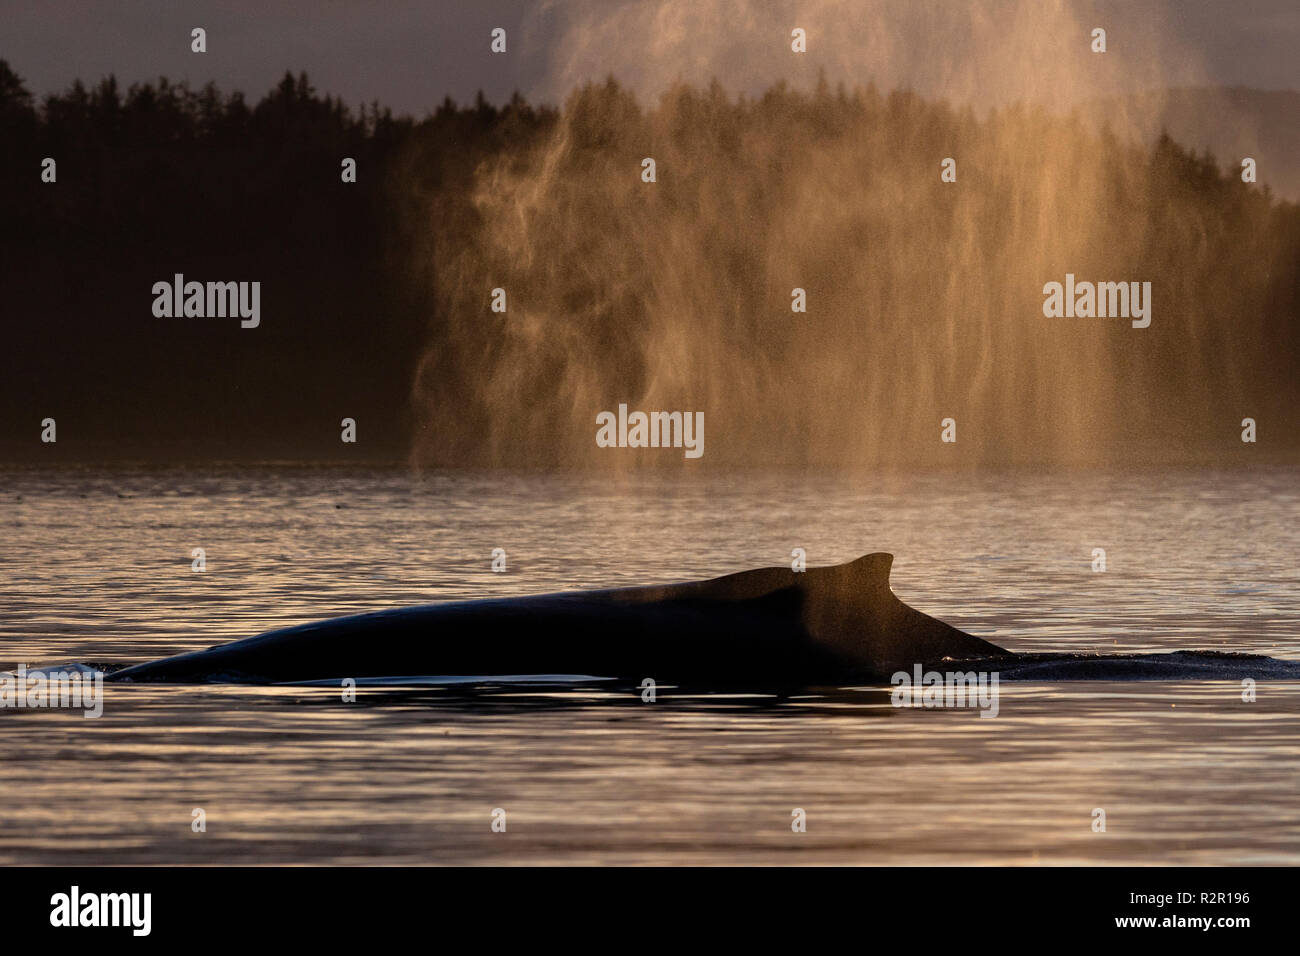 Humpback whale exhailing near an island in the Broughton Archipelago, First Nations Territory, British Columbia, Canada Stock Photo